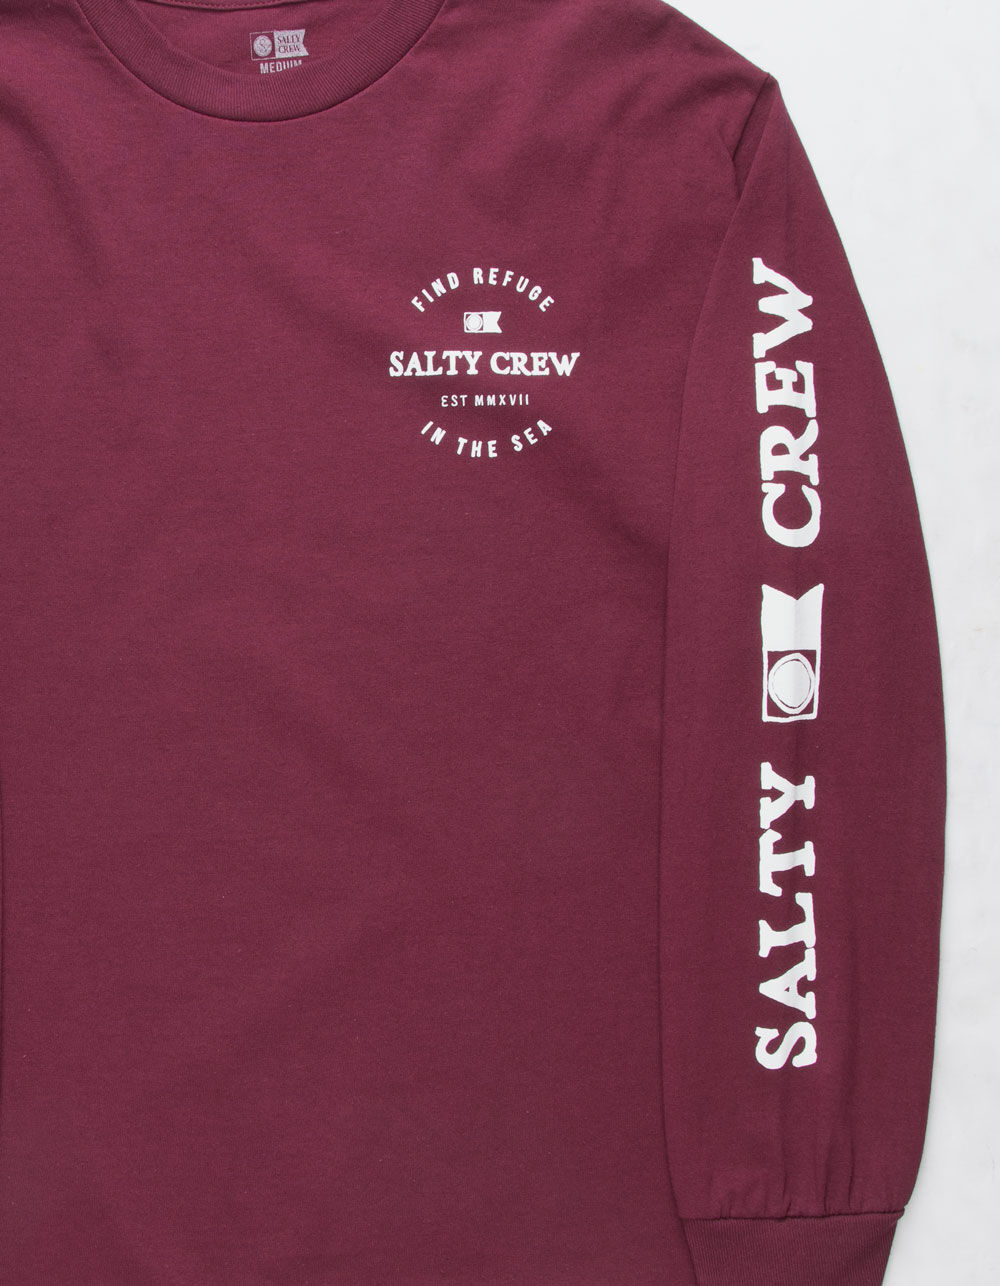 SALTY CREW Scallywag Mens T-Shirt image number 1